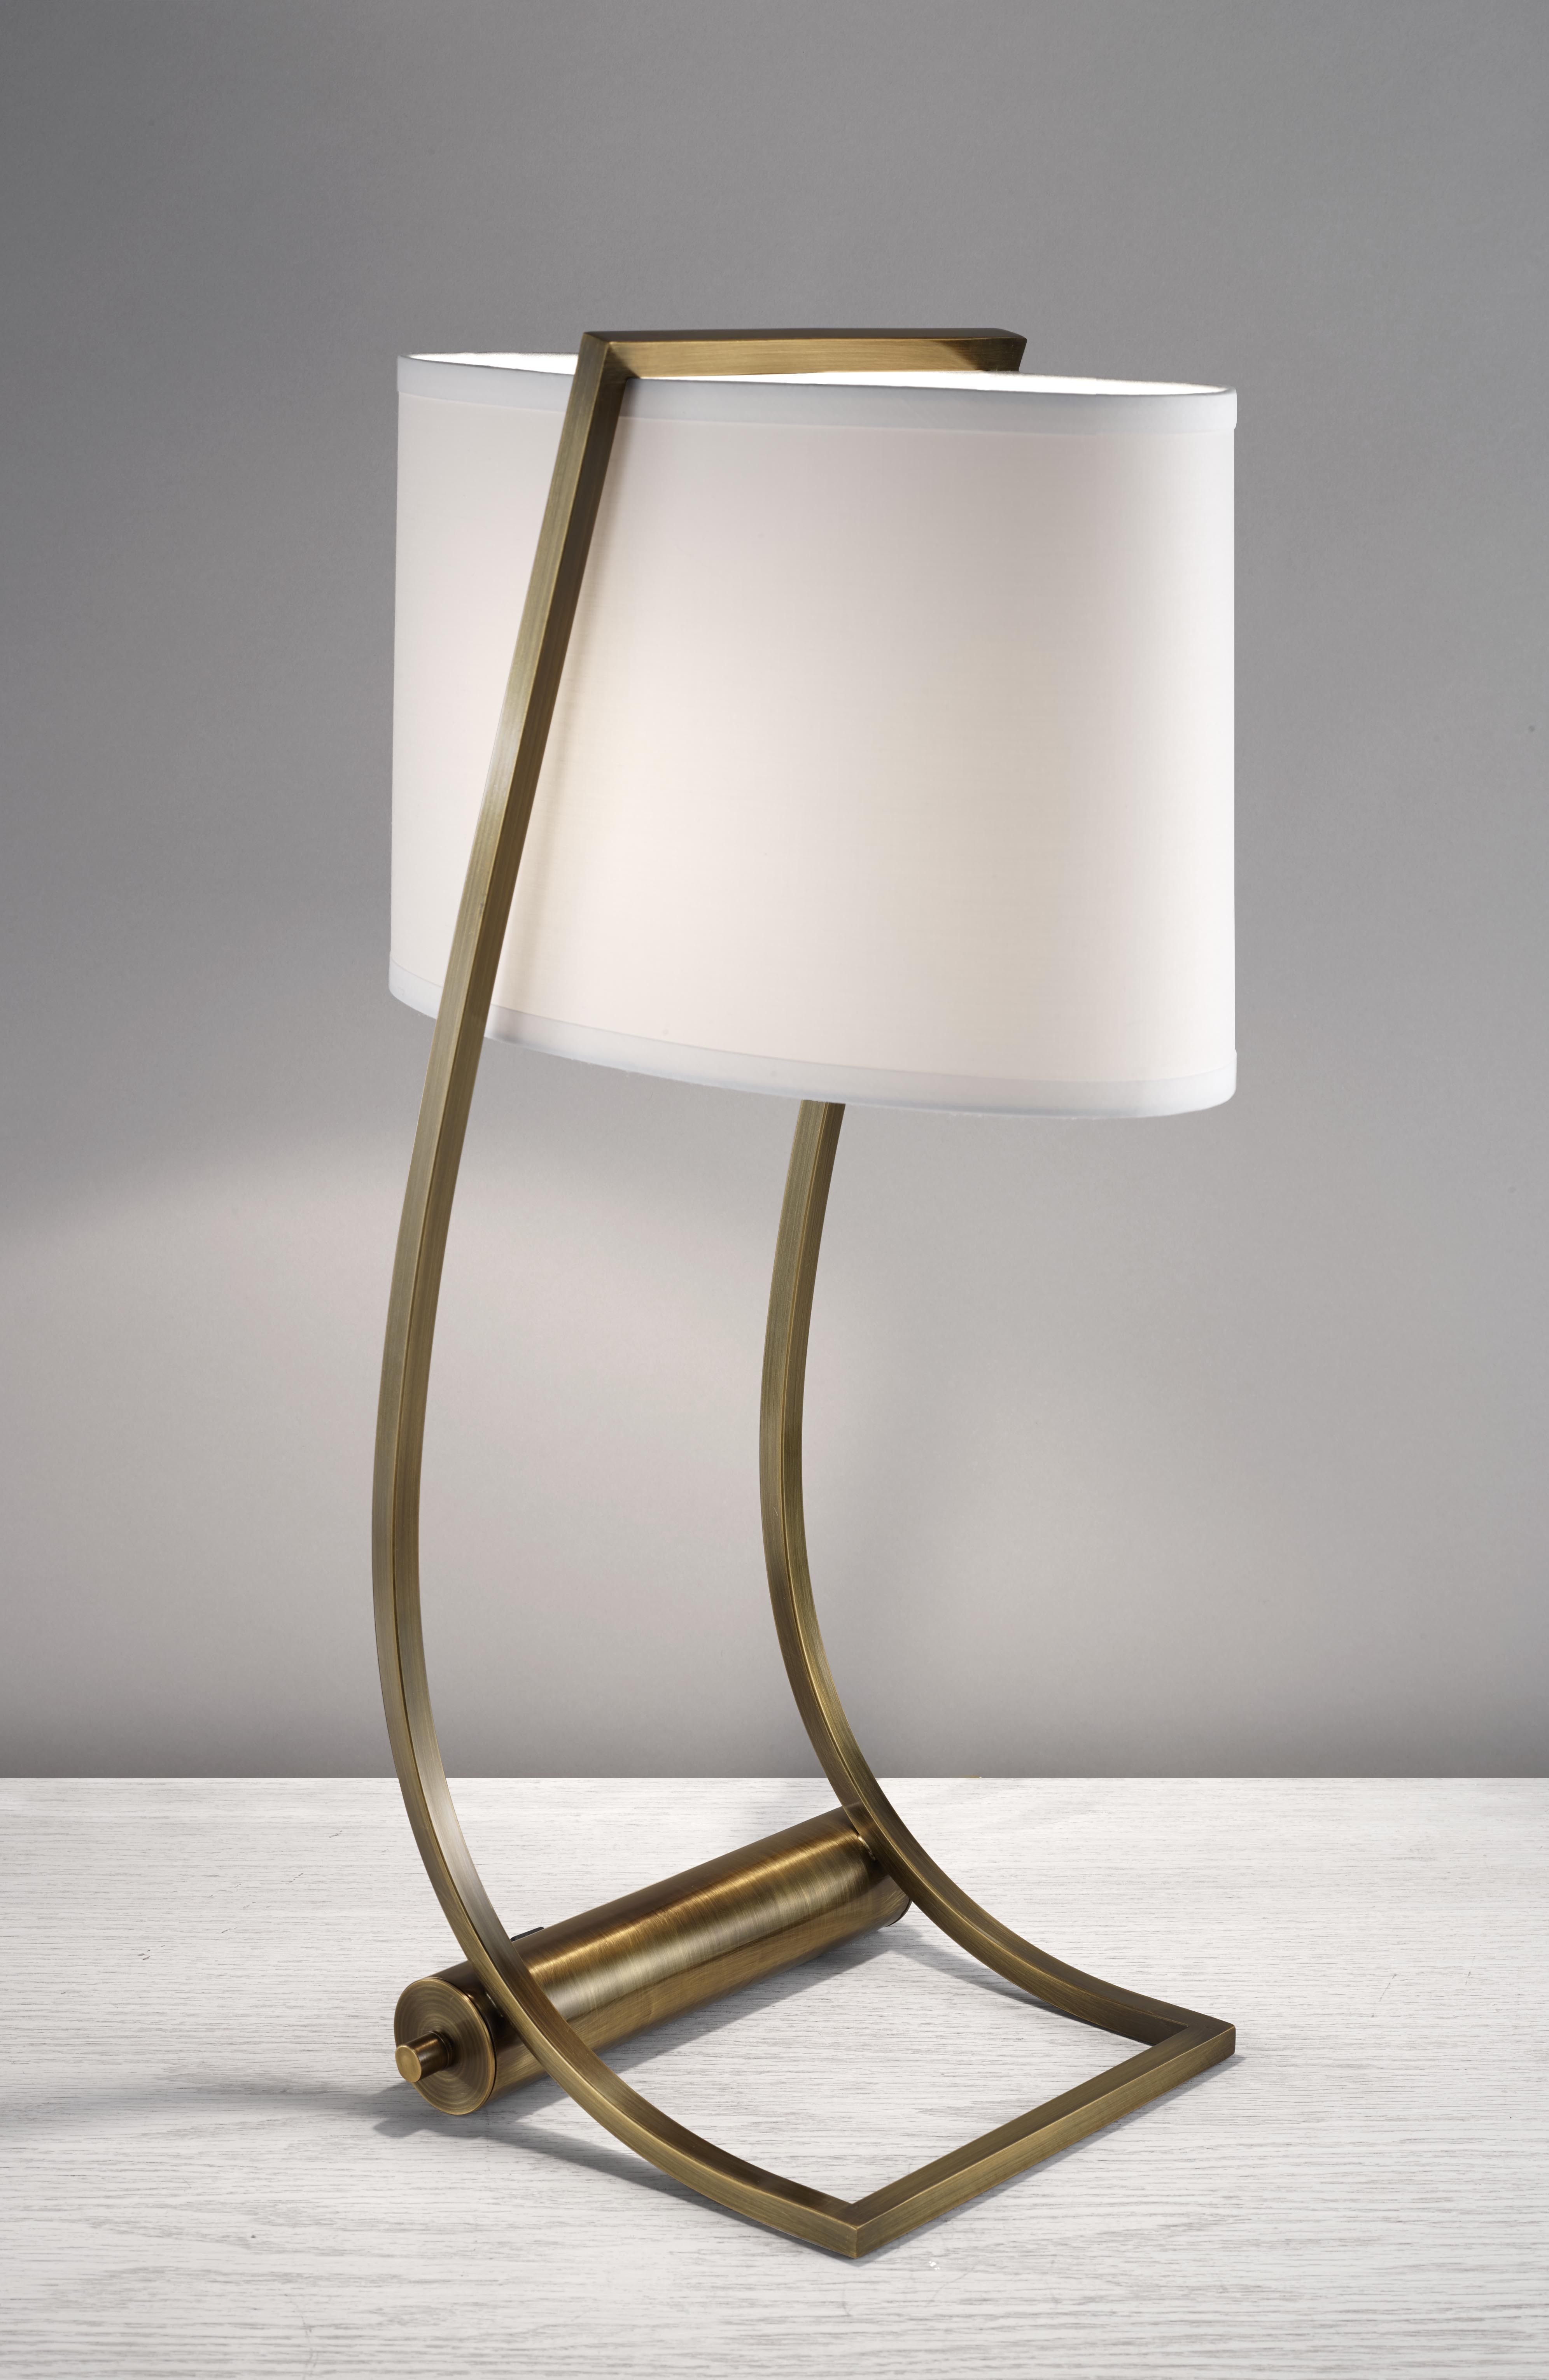 avenue brass table lamp with usb port crate and barrel lamps homeofficedecoration desk kvthome flesner brushed steel accent dinner napkins outdoor furniture perth patio chair